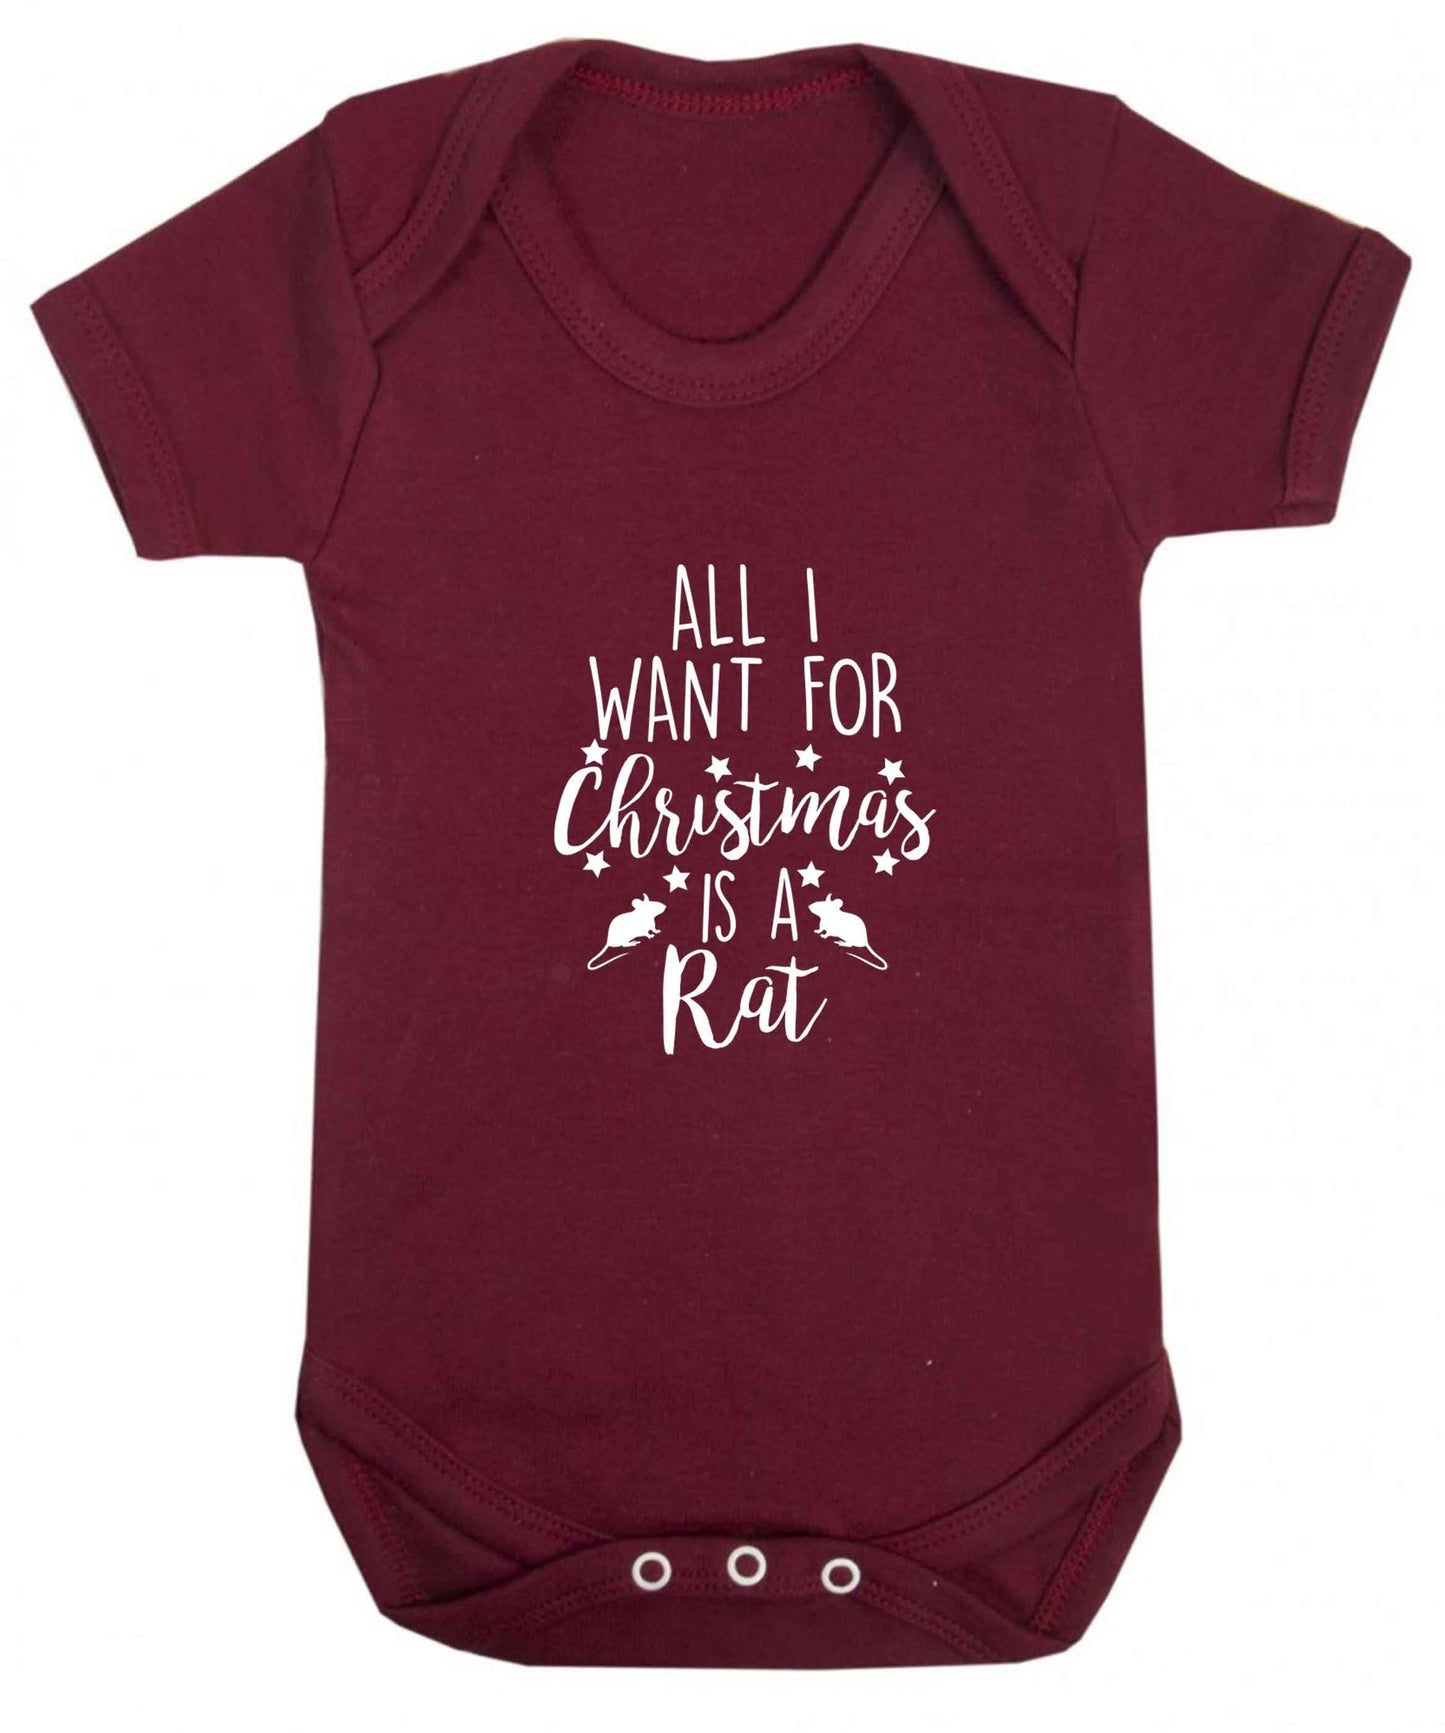 All I want for Christmas is a rat baby vest maroon 18-24 months